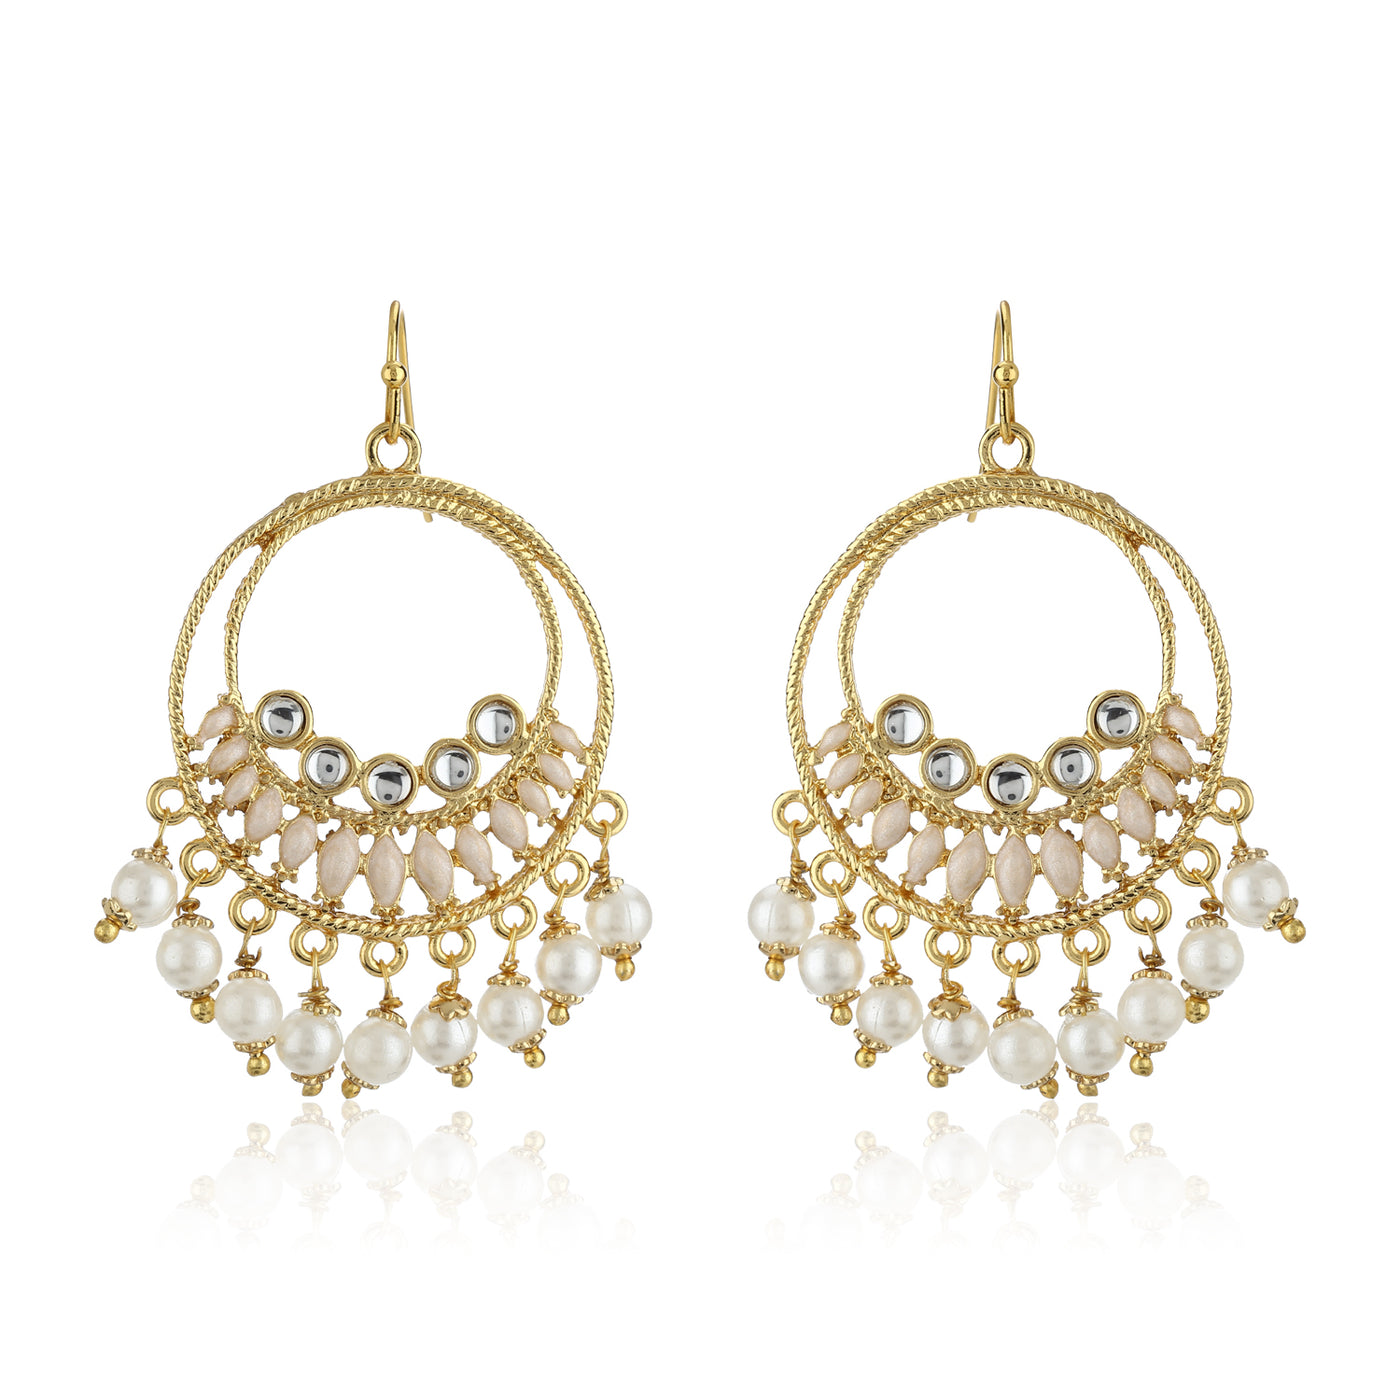 Round Hoops With White Beds Drop earrings